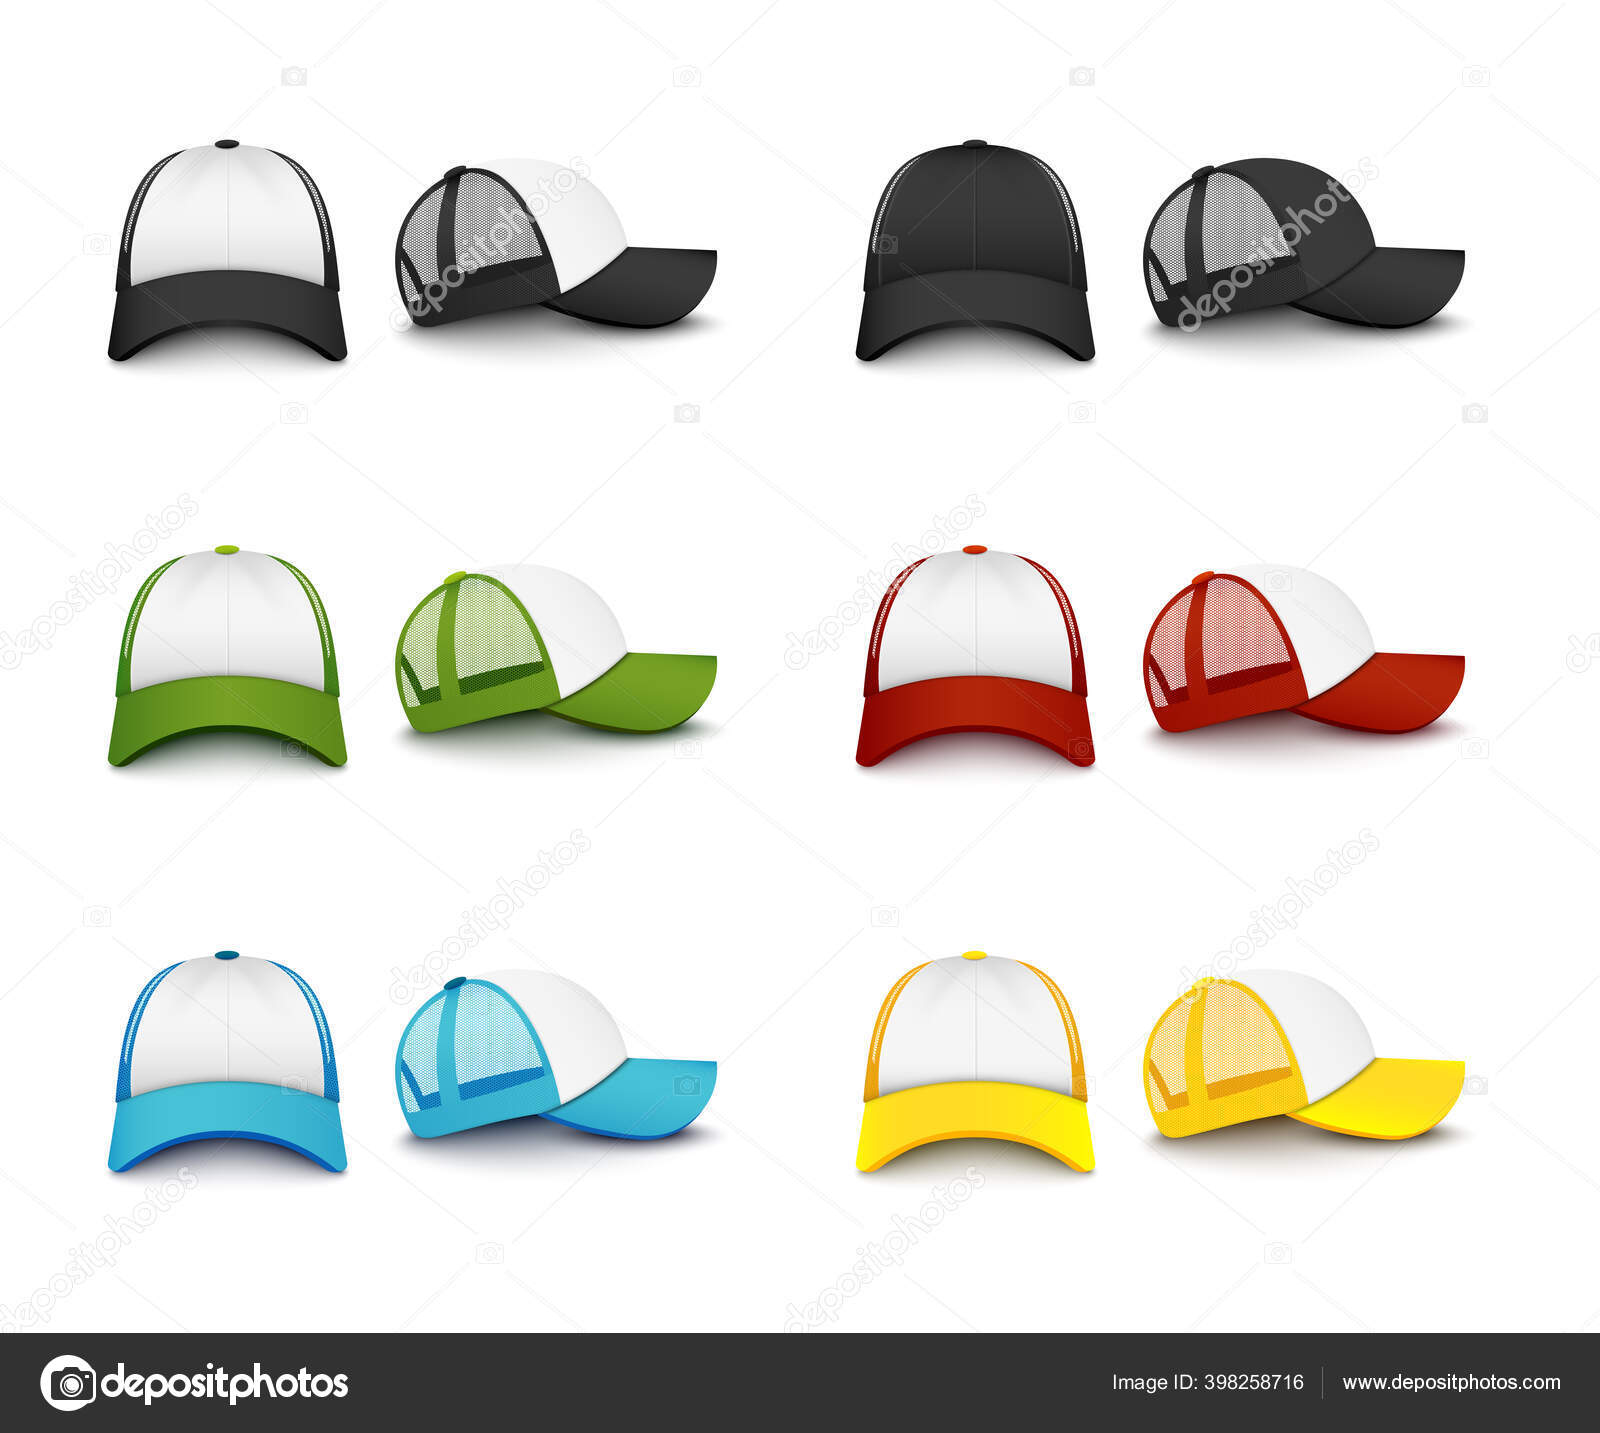 Download Realistic Colorful Baseball Cap Mockup Set From Front And Side View Stock Vector Image By C Sabelskaya 398258716